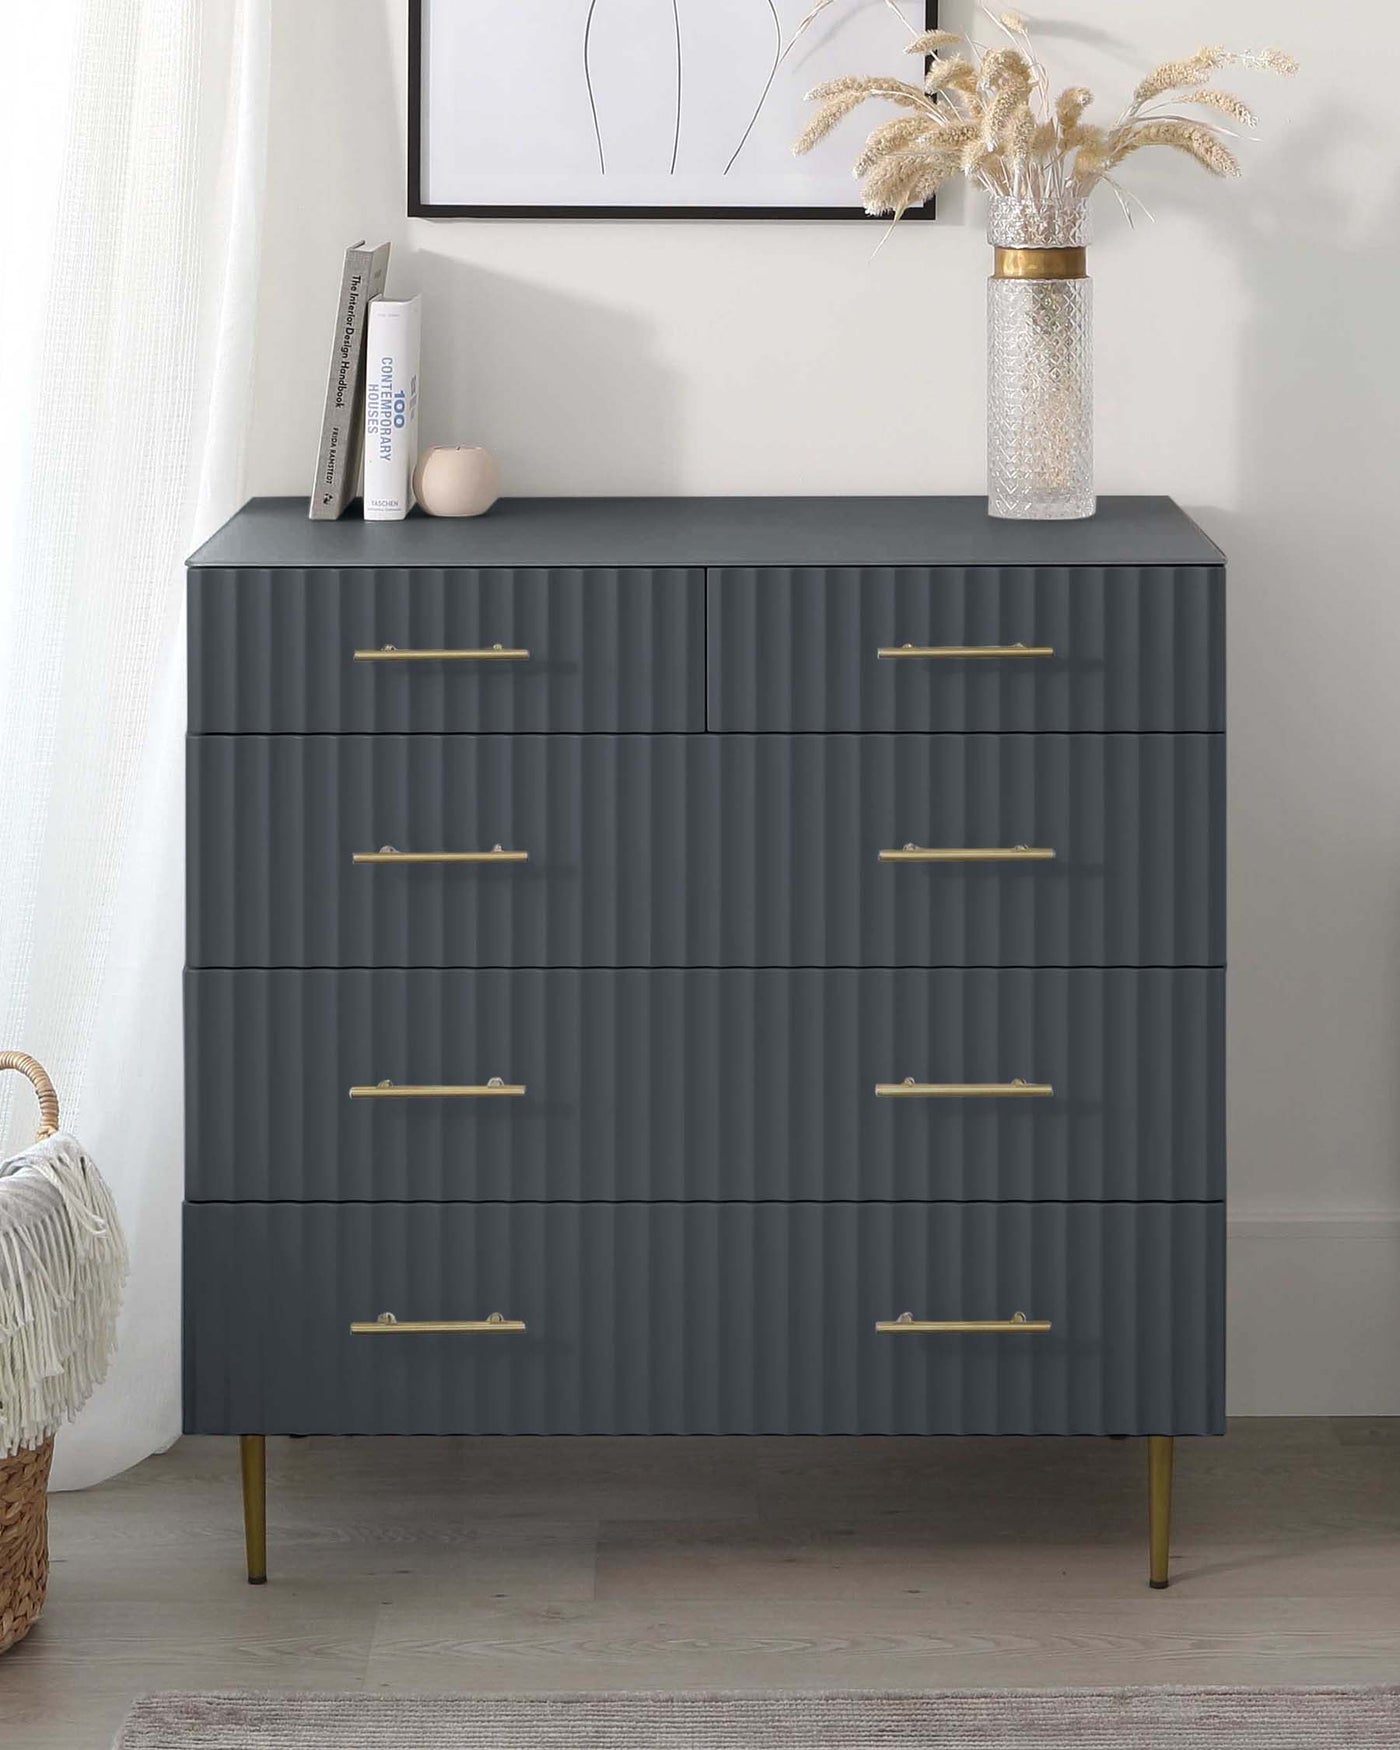 A modern charcoal grey dresser with six drawers, featuring a textured front and brass-finish handles, supported by four tapered metal legs in a matching brass finish.